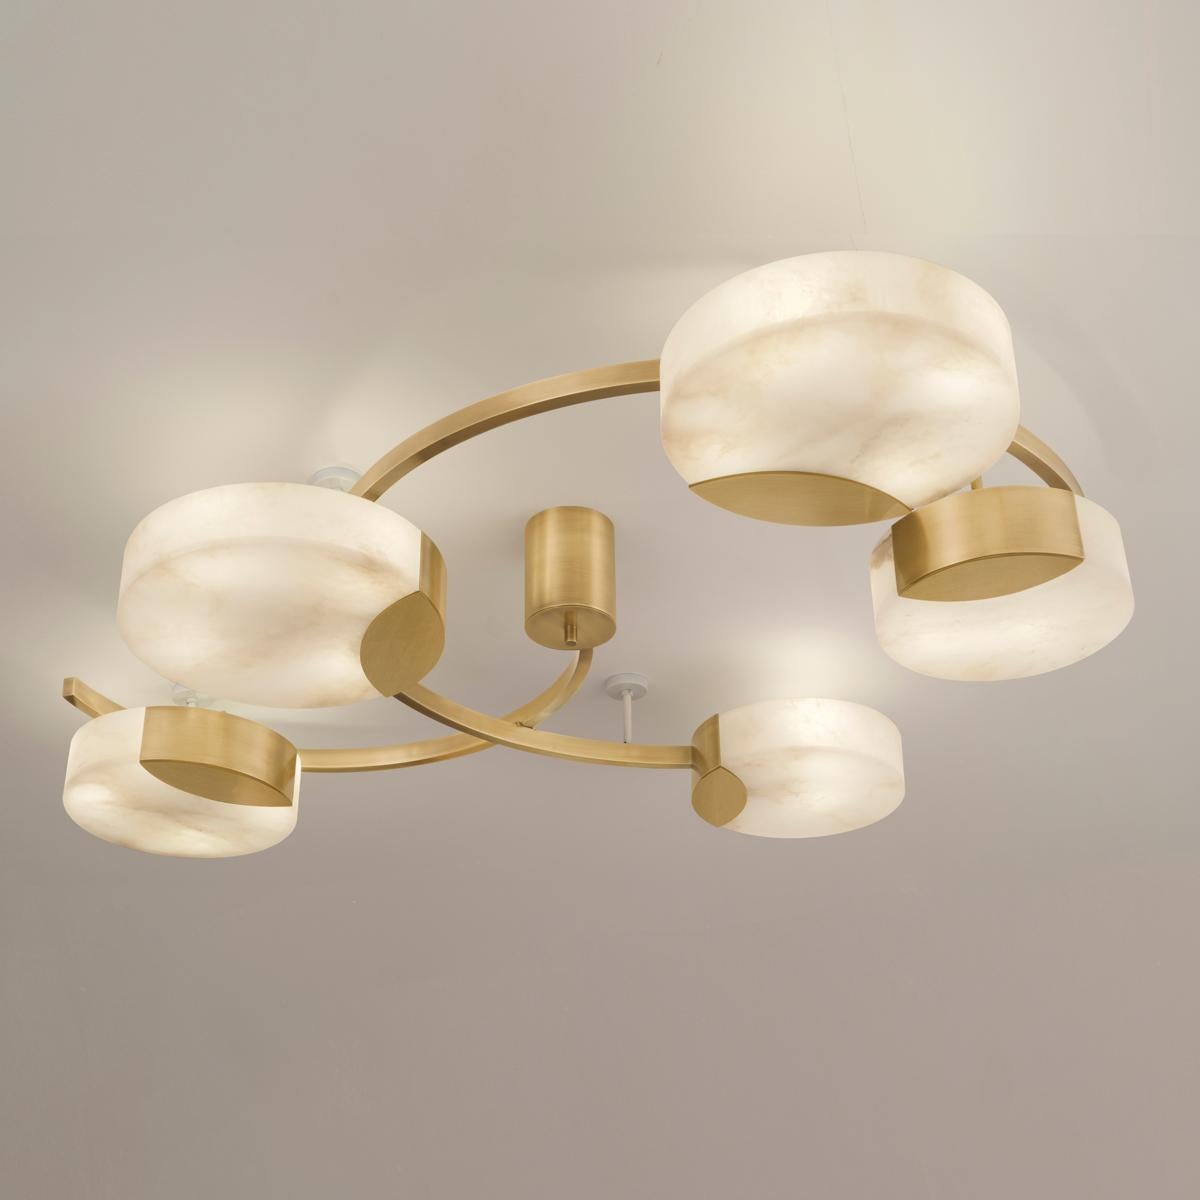 Modern Cloud N.5 Ceiling Light by Gaspare Asaro-Satin Brass Finish For Sale